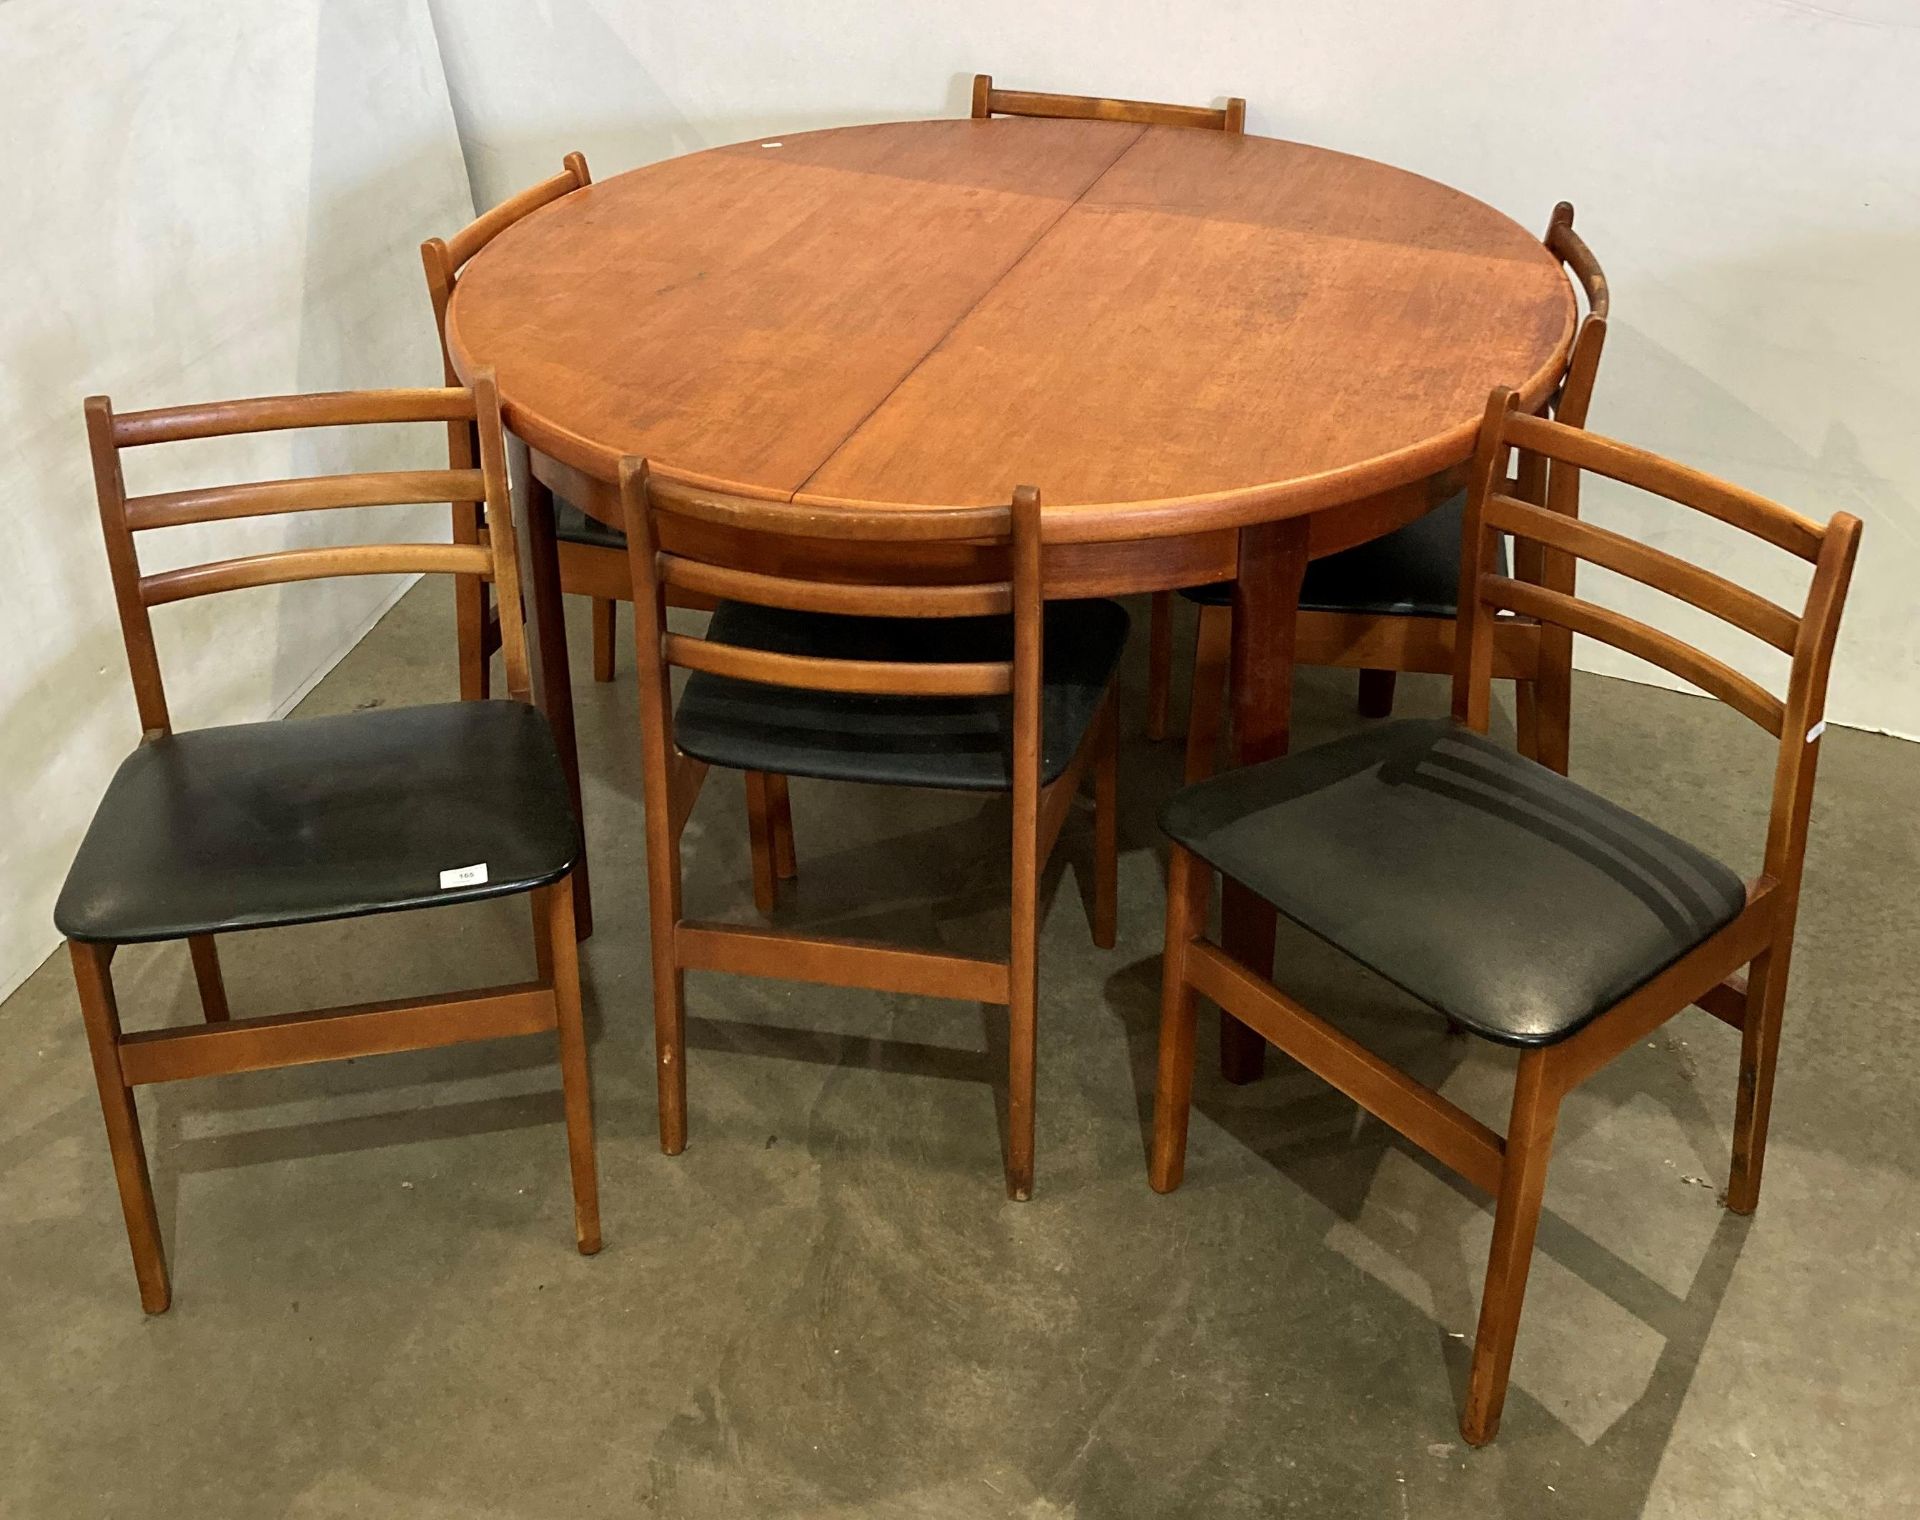 Mid-Century circular extending dining table - possibly Danish (no makers mark visible) - and a set